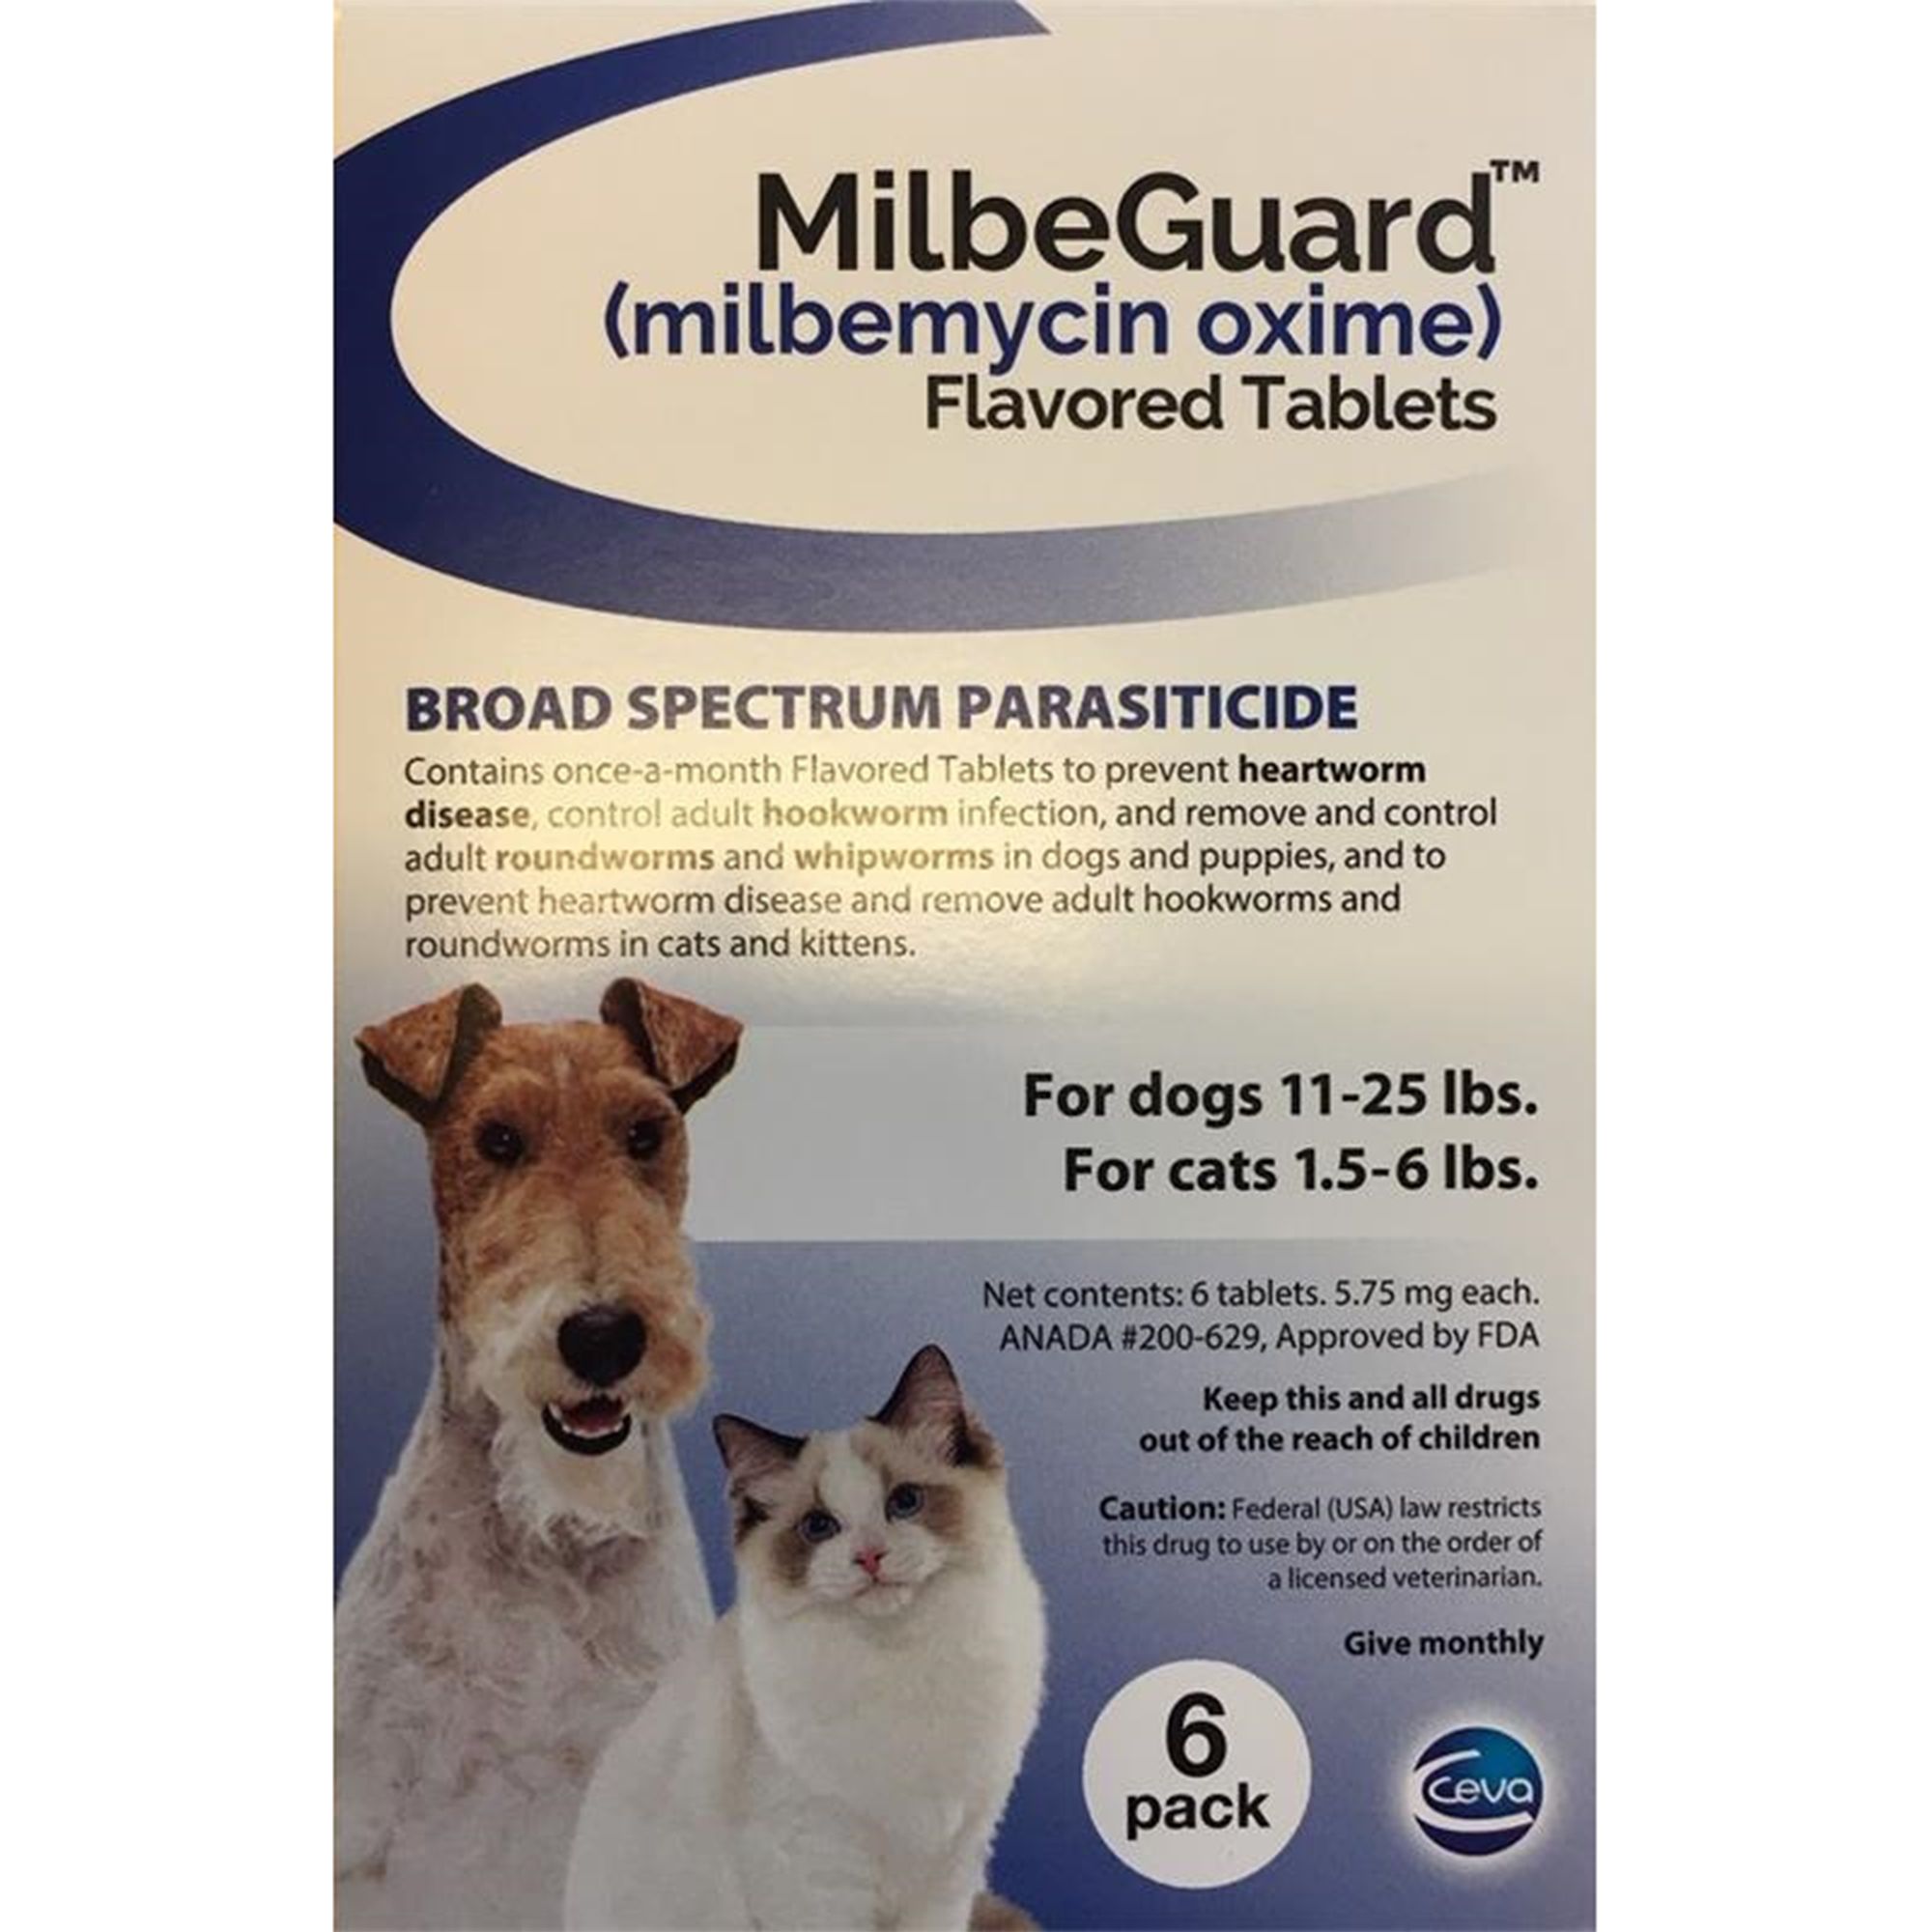 milbeguard-flavored-tablets-for-dogs-and-cats-6-month-supply-dogs-11